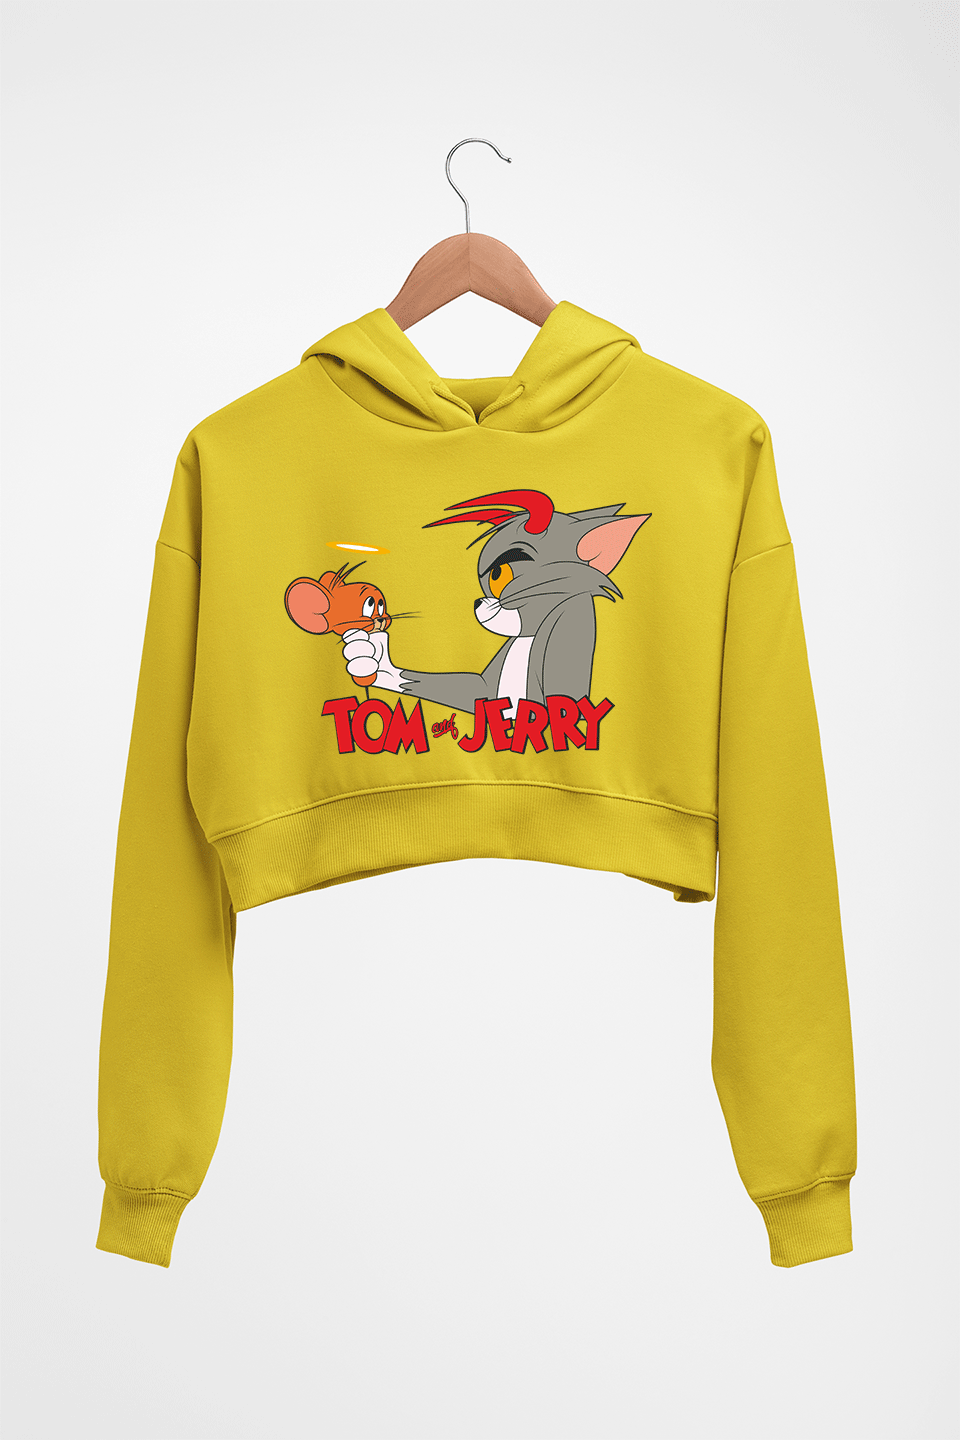 Tom and Jerry Crop HOODIE FOR WOMEN